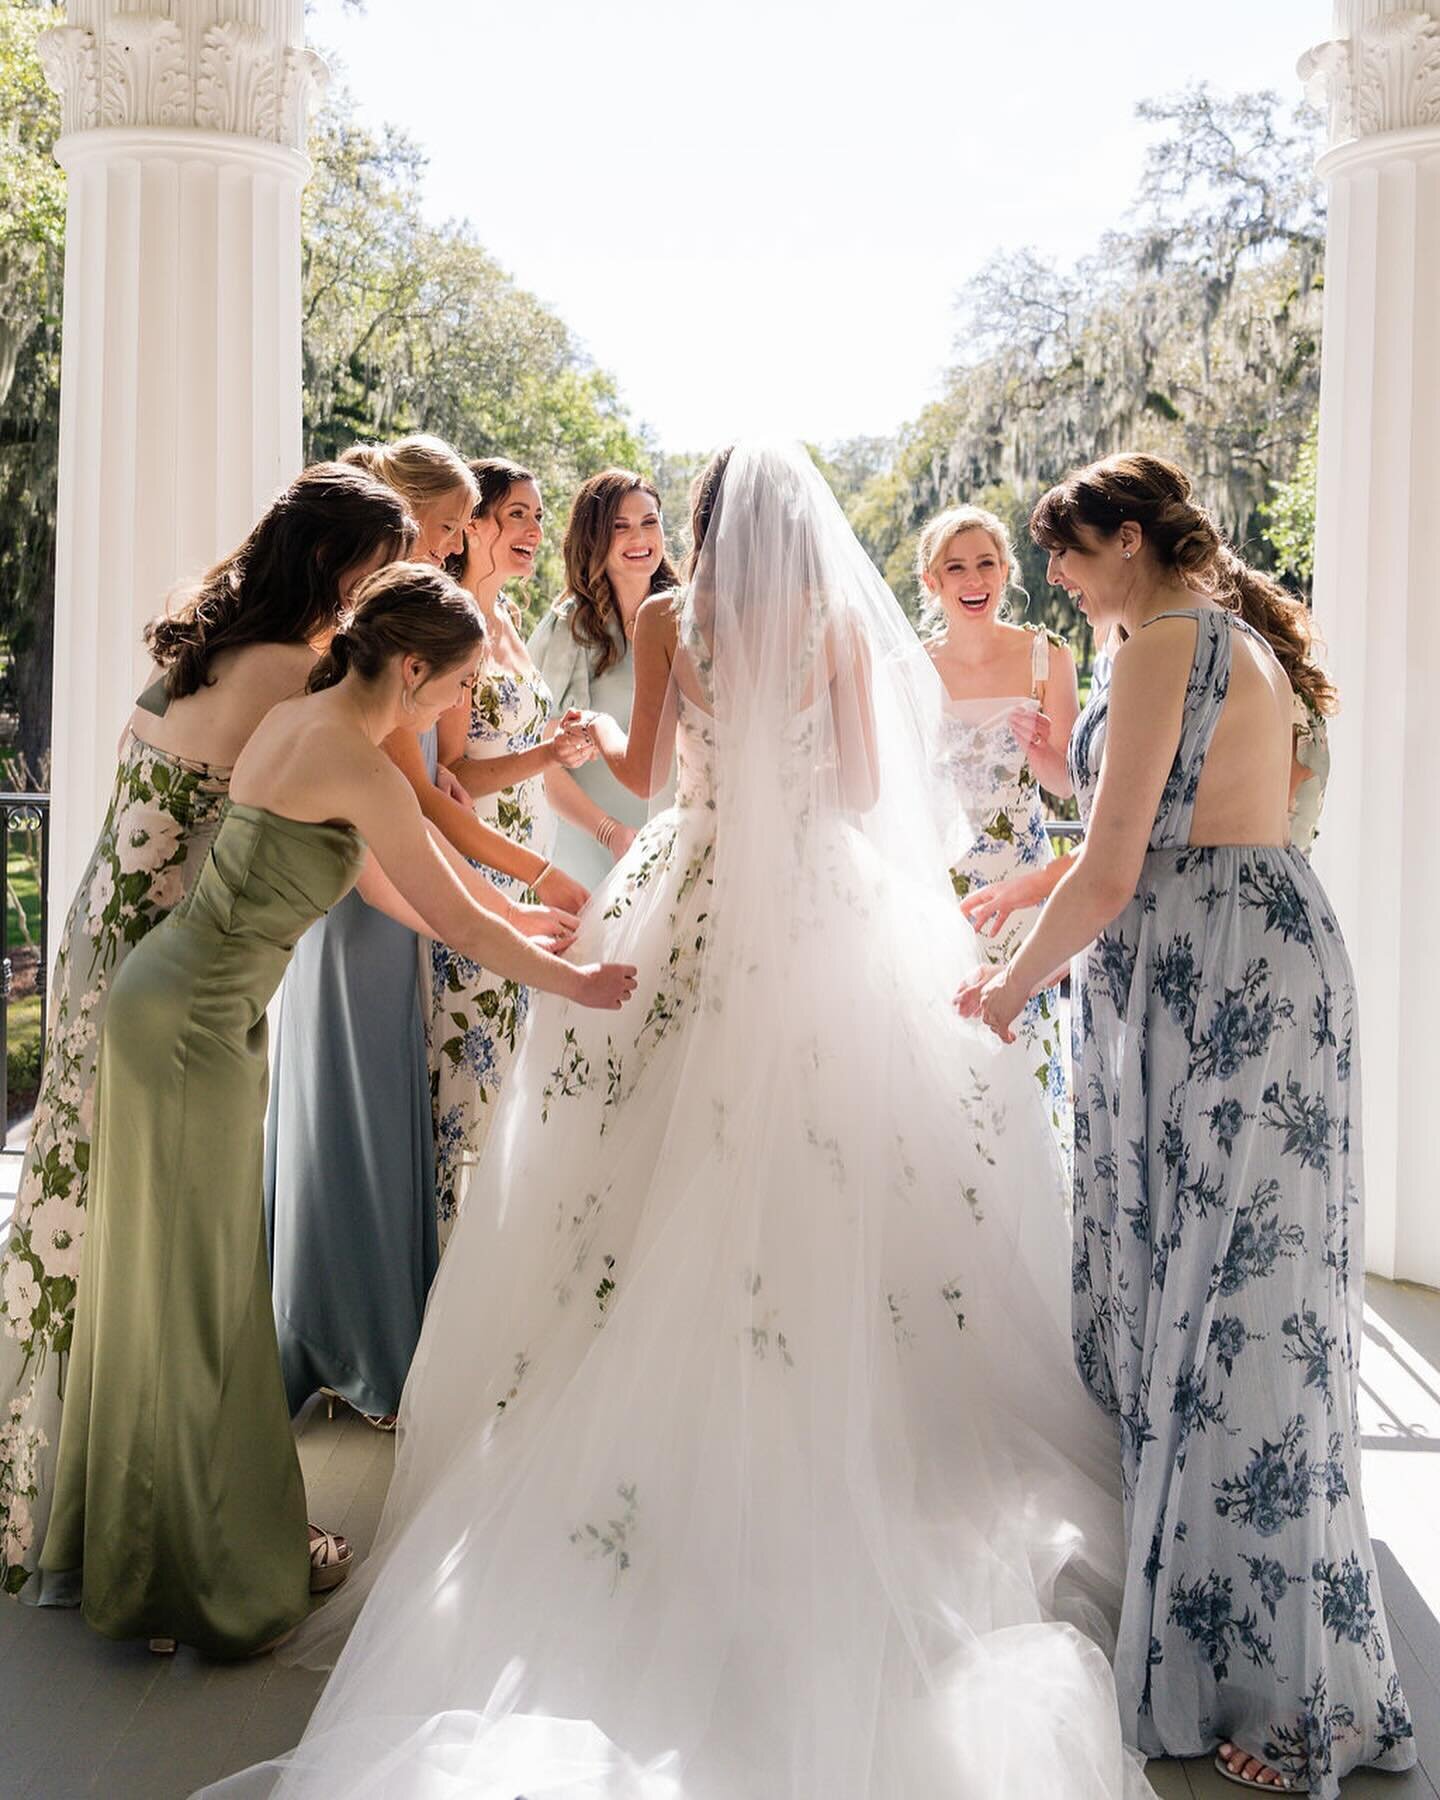 That first *spring day* feeling but in a mood board. Our bride Kylie&rsquo;s wedding affair was the epitome of early blooms with a budding oasis across tables, cakes and her floral-clad bridesmaids all in delicate pastels. Not to be overlooked, the b